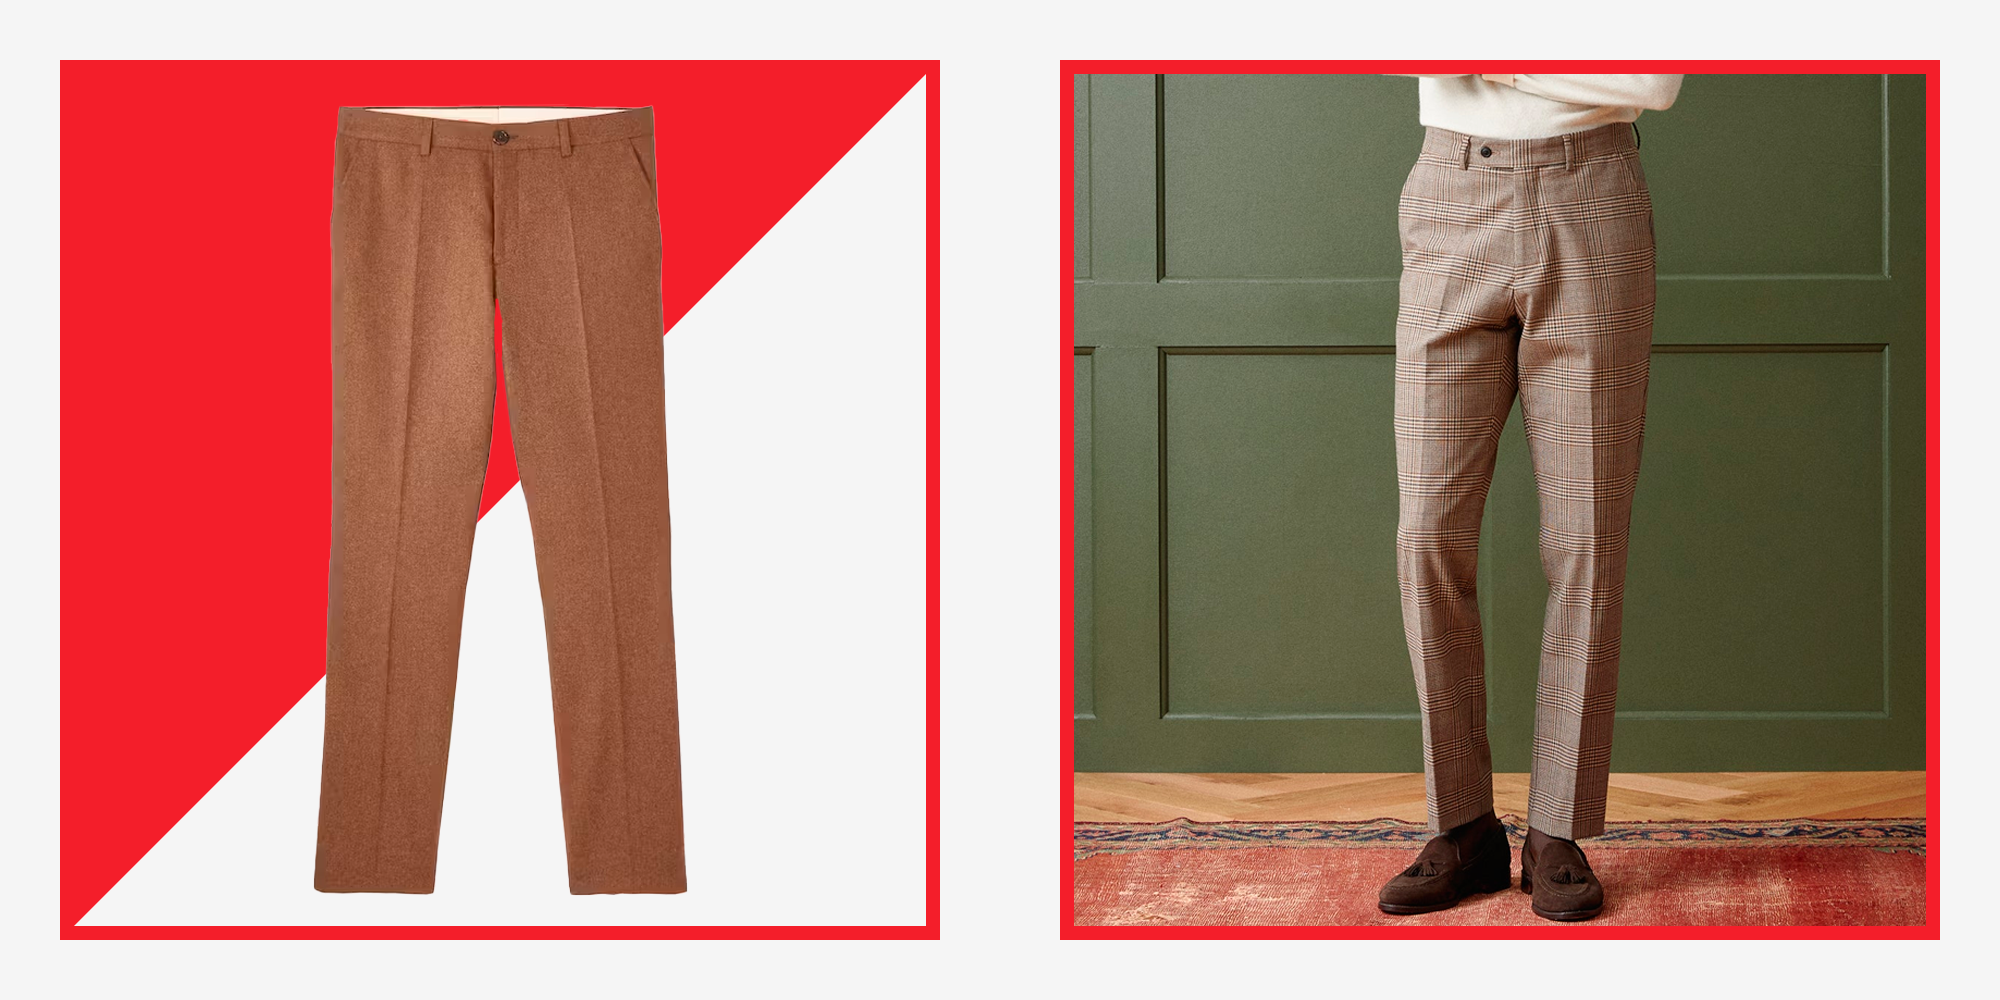 Best Casual Pants for Men: 8 Options That Go Beyond Jeans | TIME Stamped